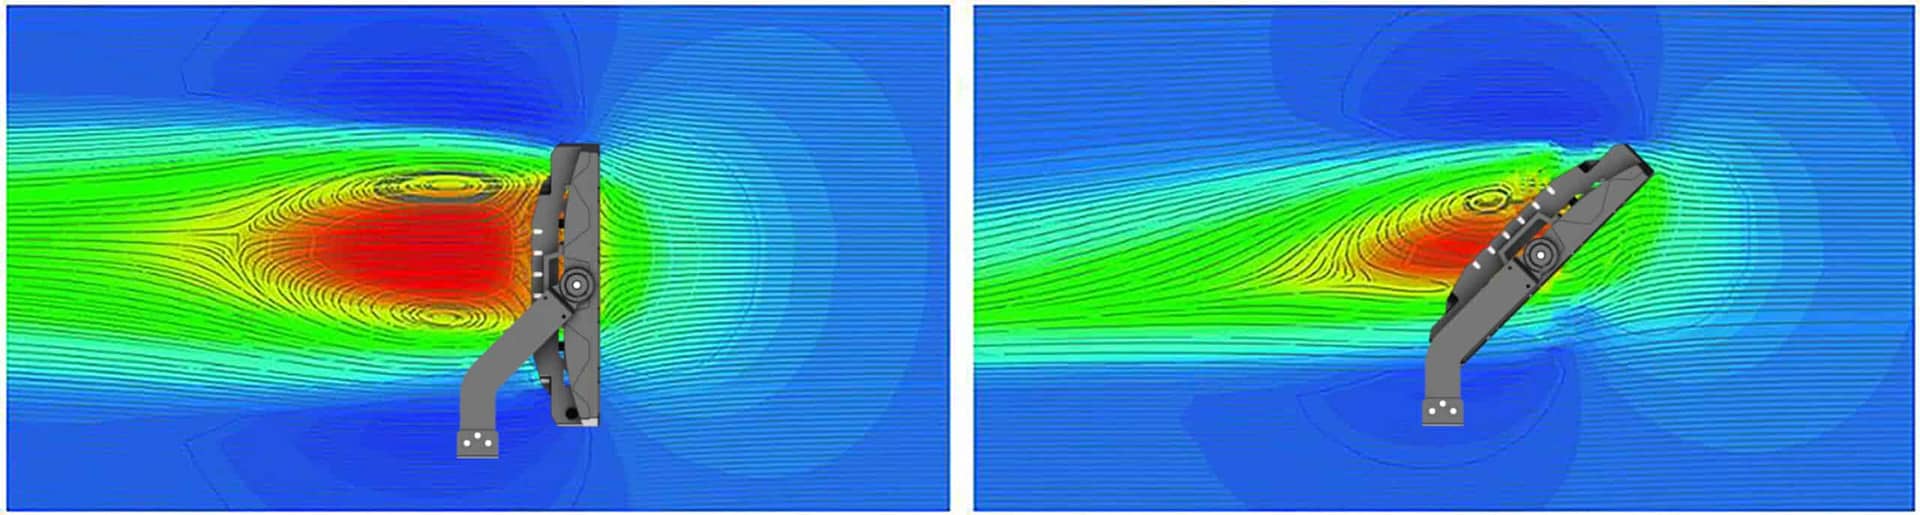 Flow simulation of ZGSM flood light with different projection angles